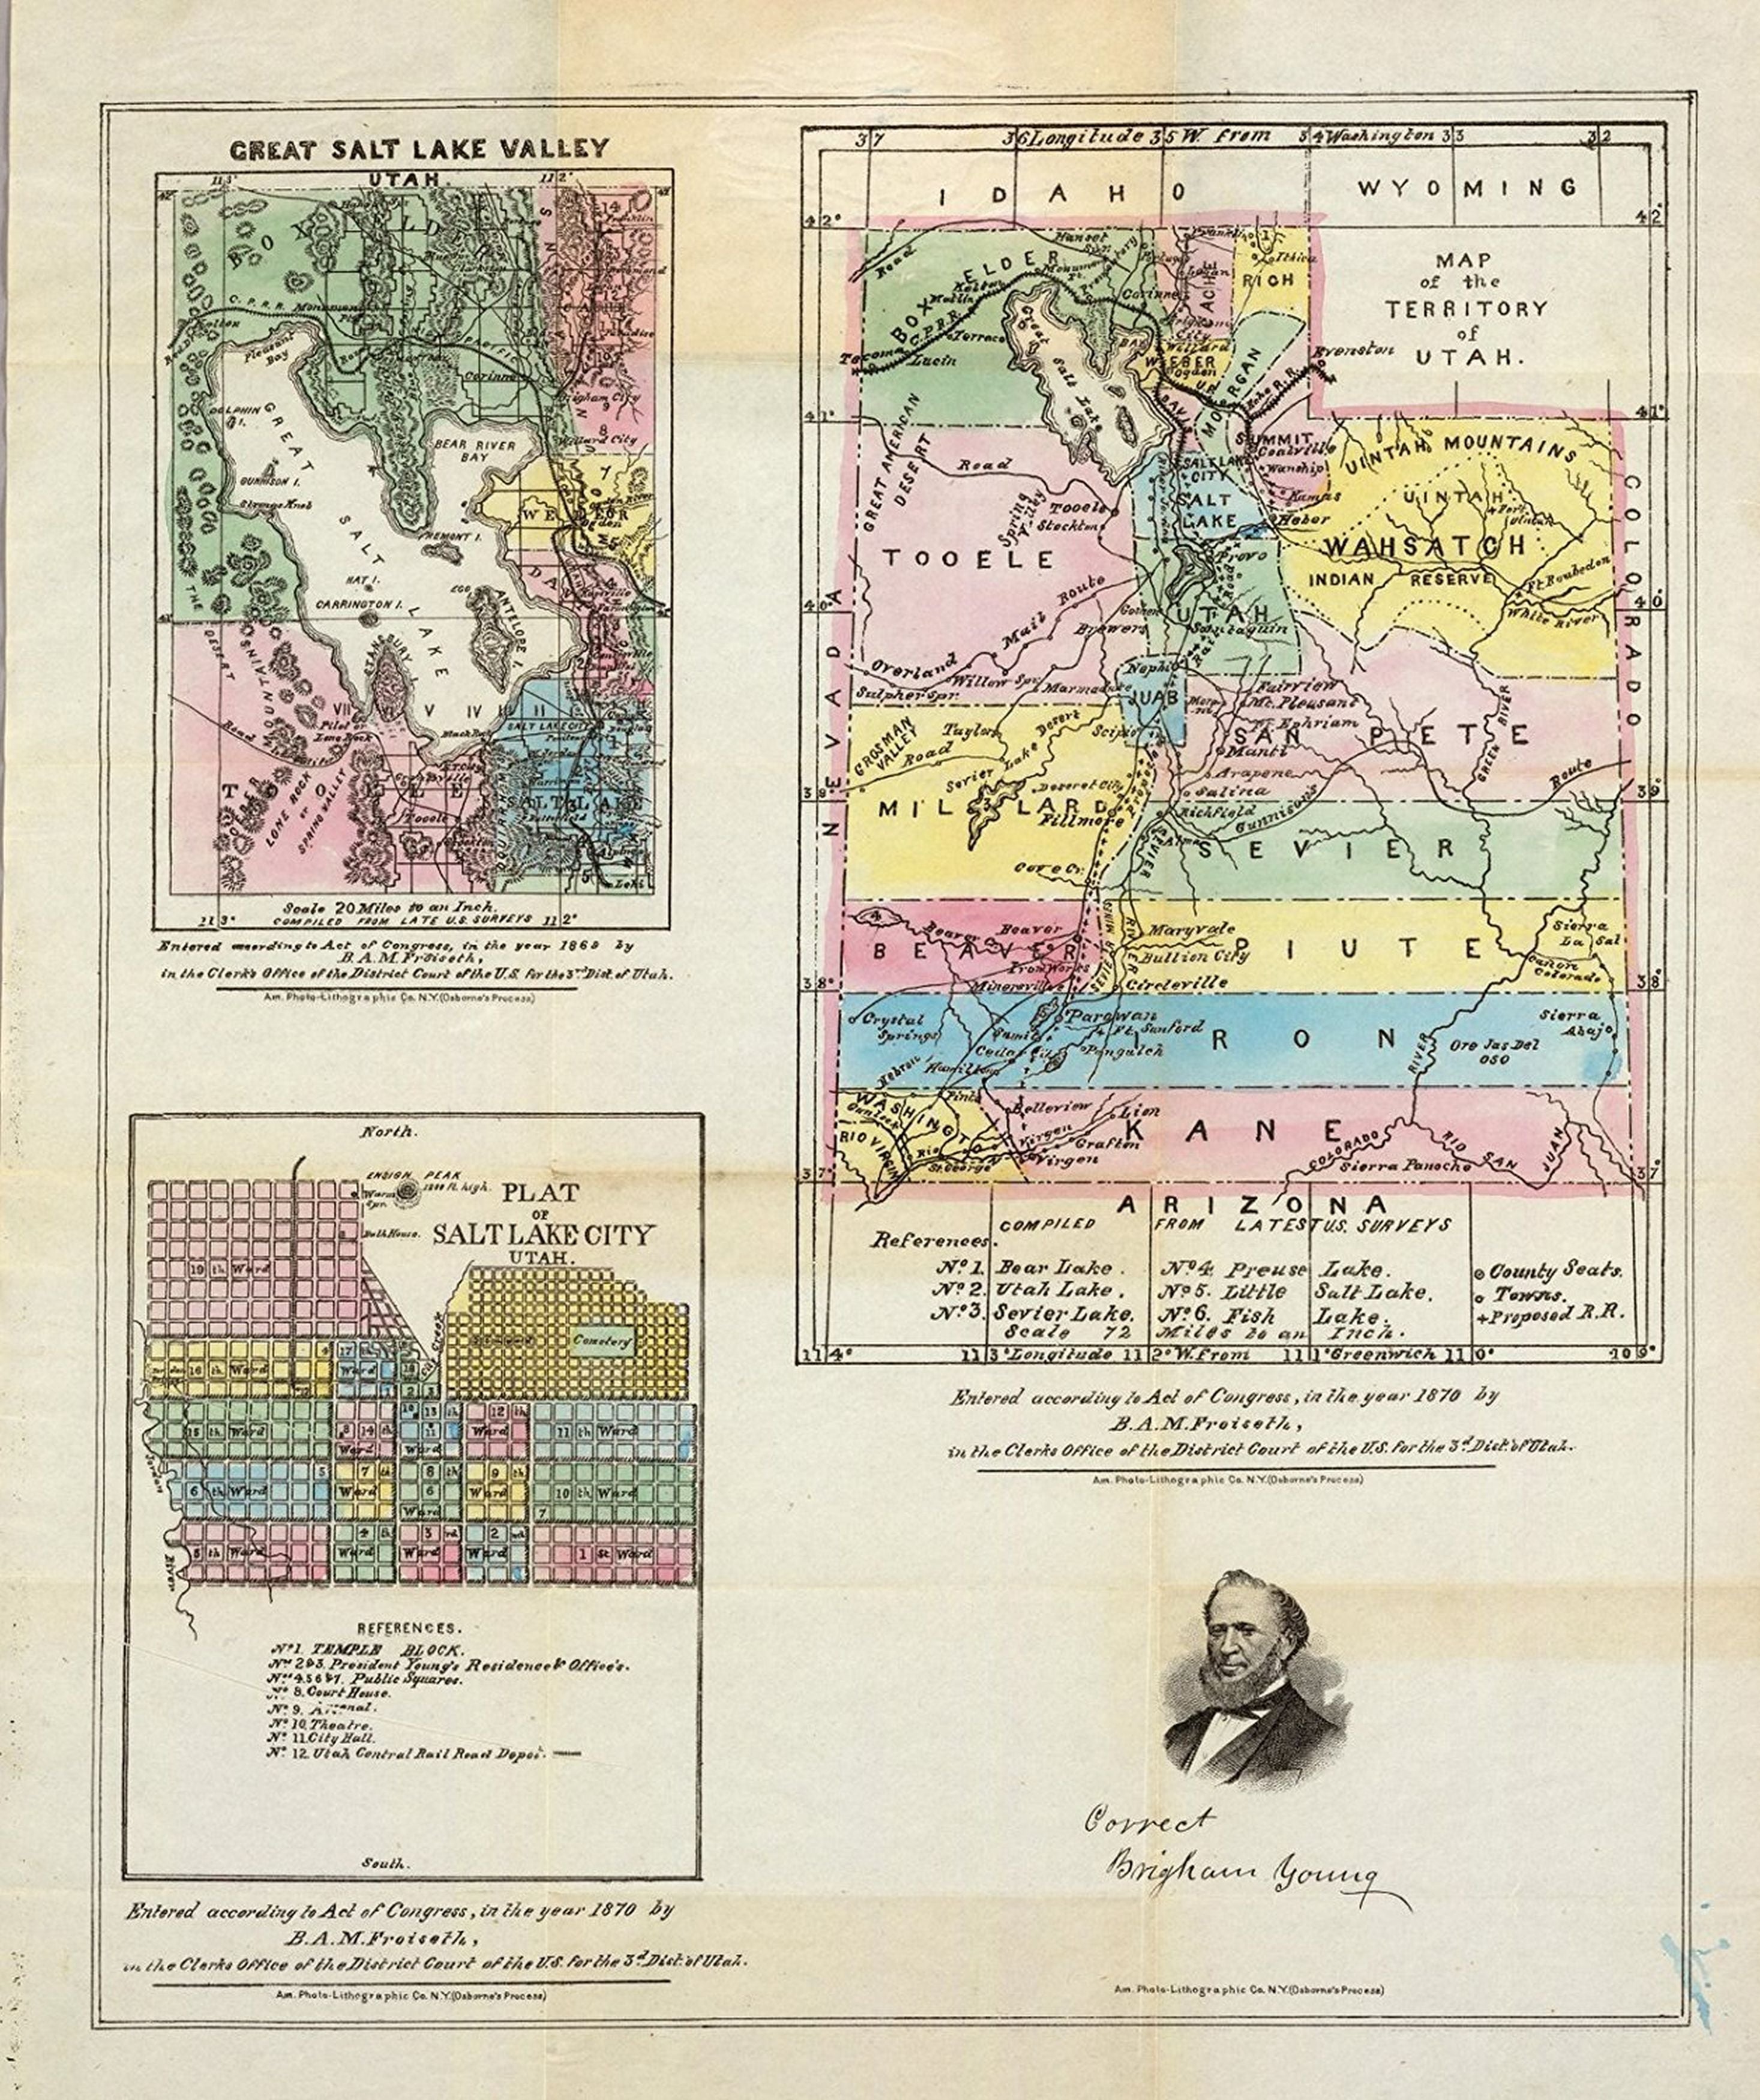 Map of the Territory of Utah. Compiled From Latest U.S. Surveys. Entered... 1870 by B.A.M. Froiseth... Utah. Am. Photo-Lithographic Co. N.Y. (Osborne's Process.) Correct Brigham Young. (with map) Great Salt Lake Valley Utah... Entered... 1869 by B.A.M. F